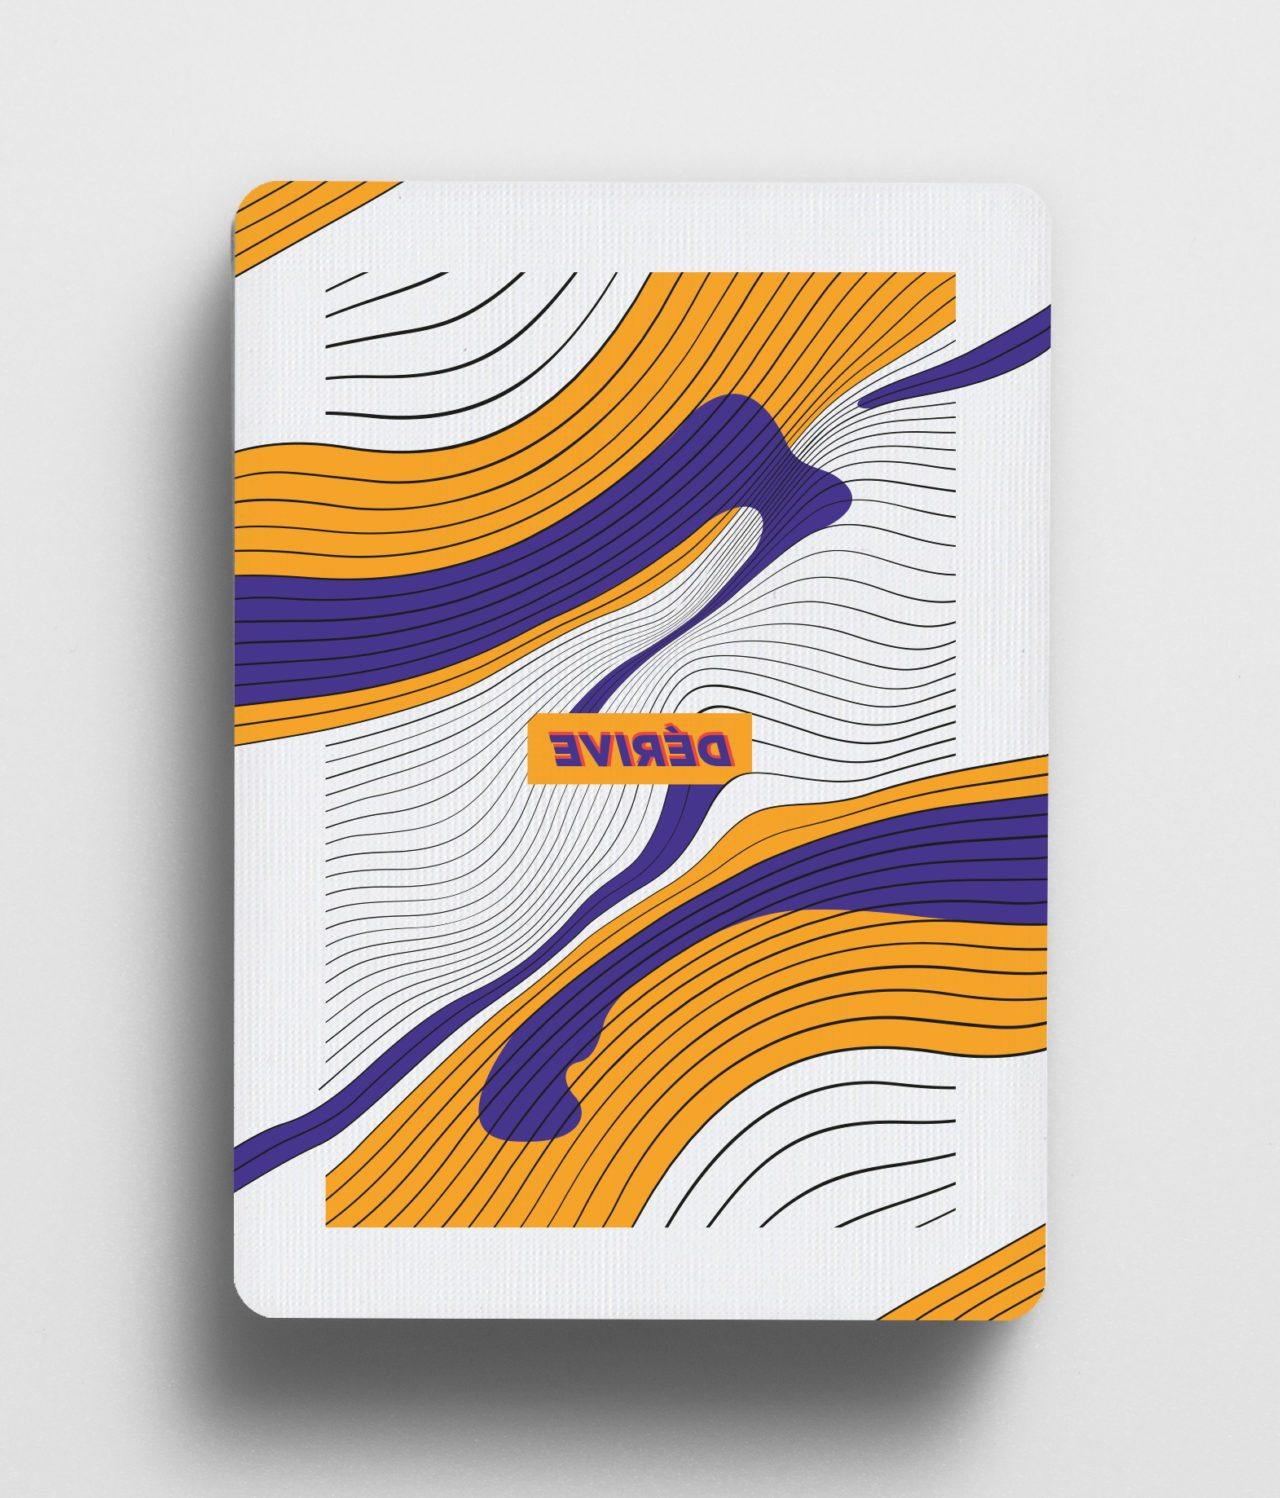 Derive Prune Edition Playing Cards by Cardistry Touch - Deckita Decks